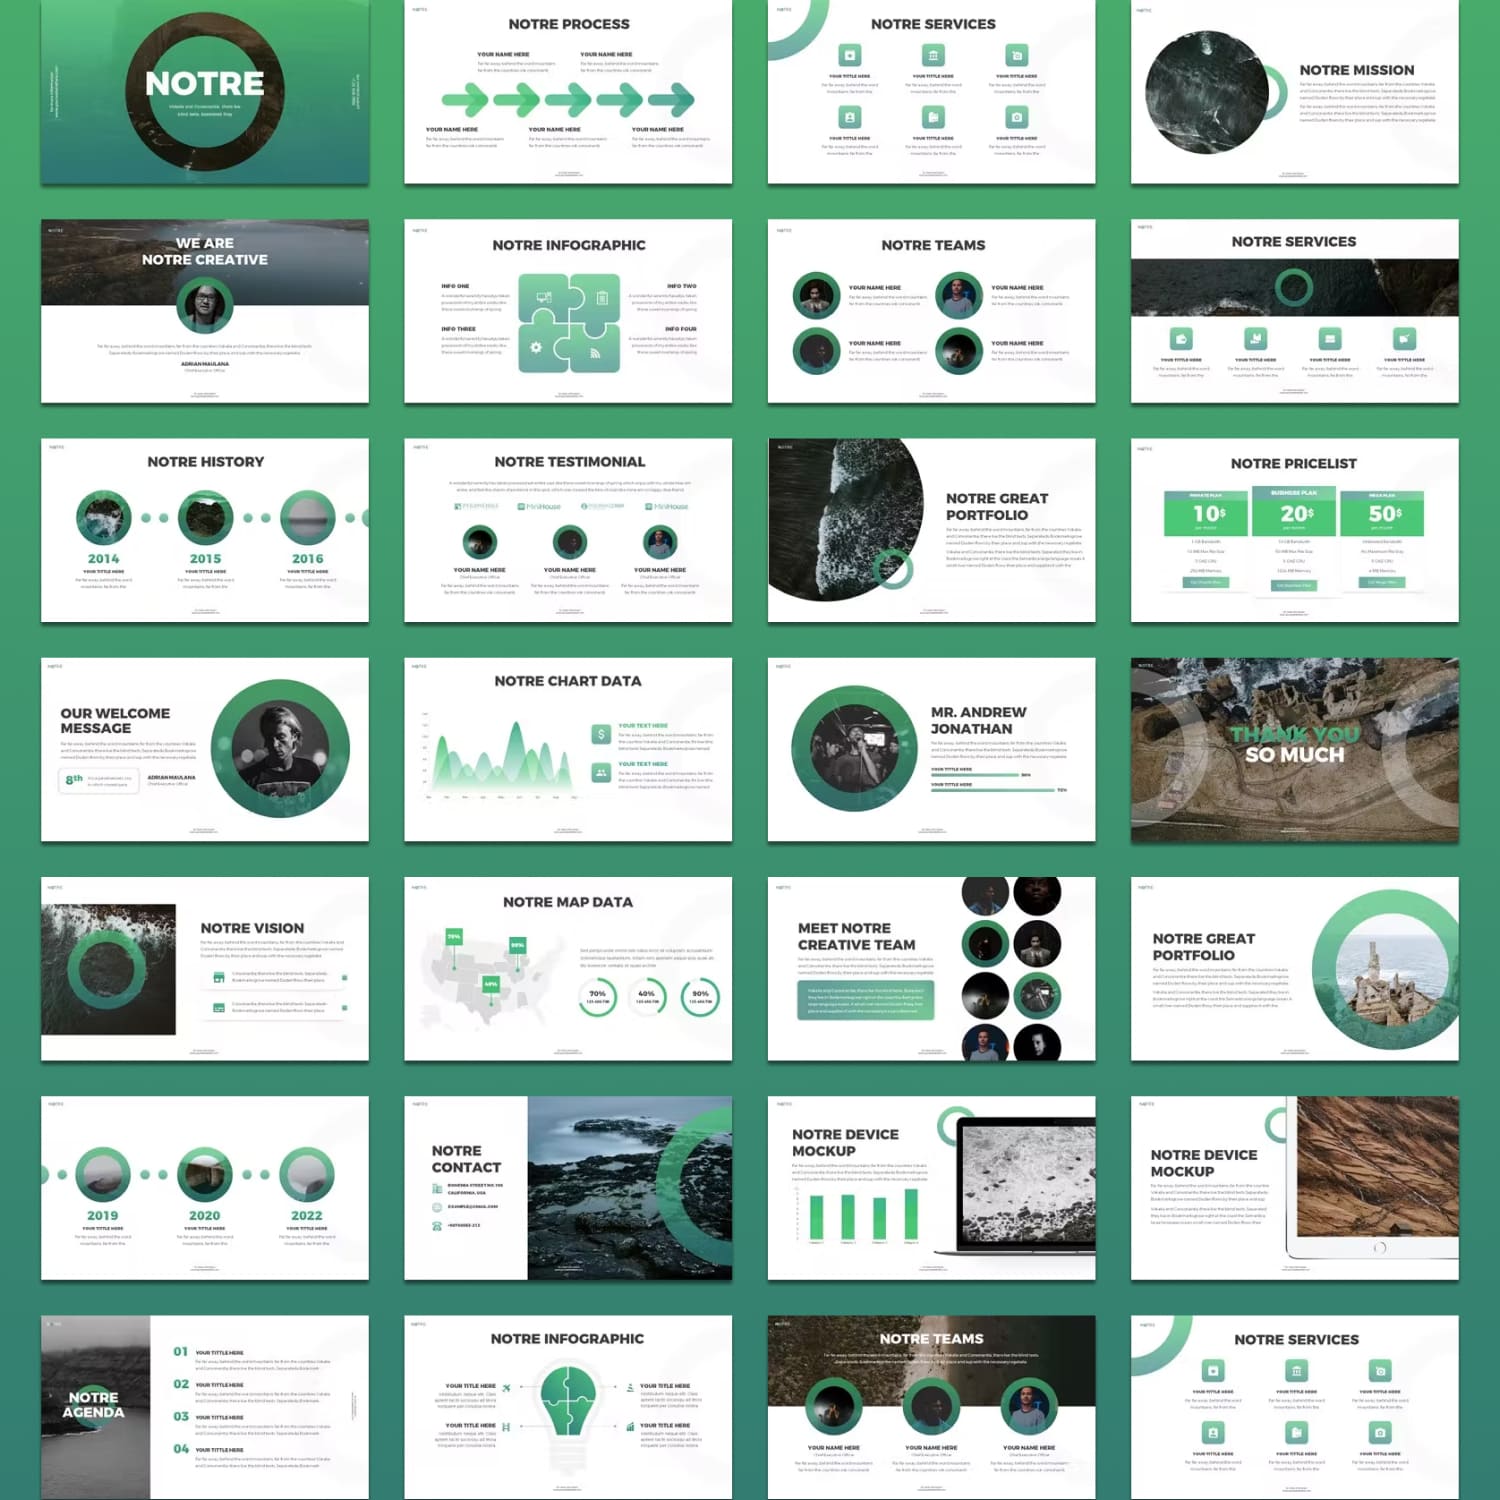 Notre strategic plan powerpoint template from SlideFactory.